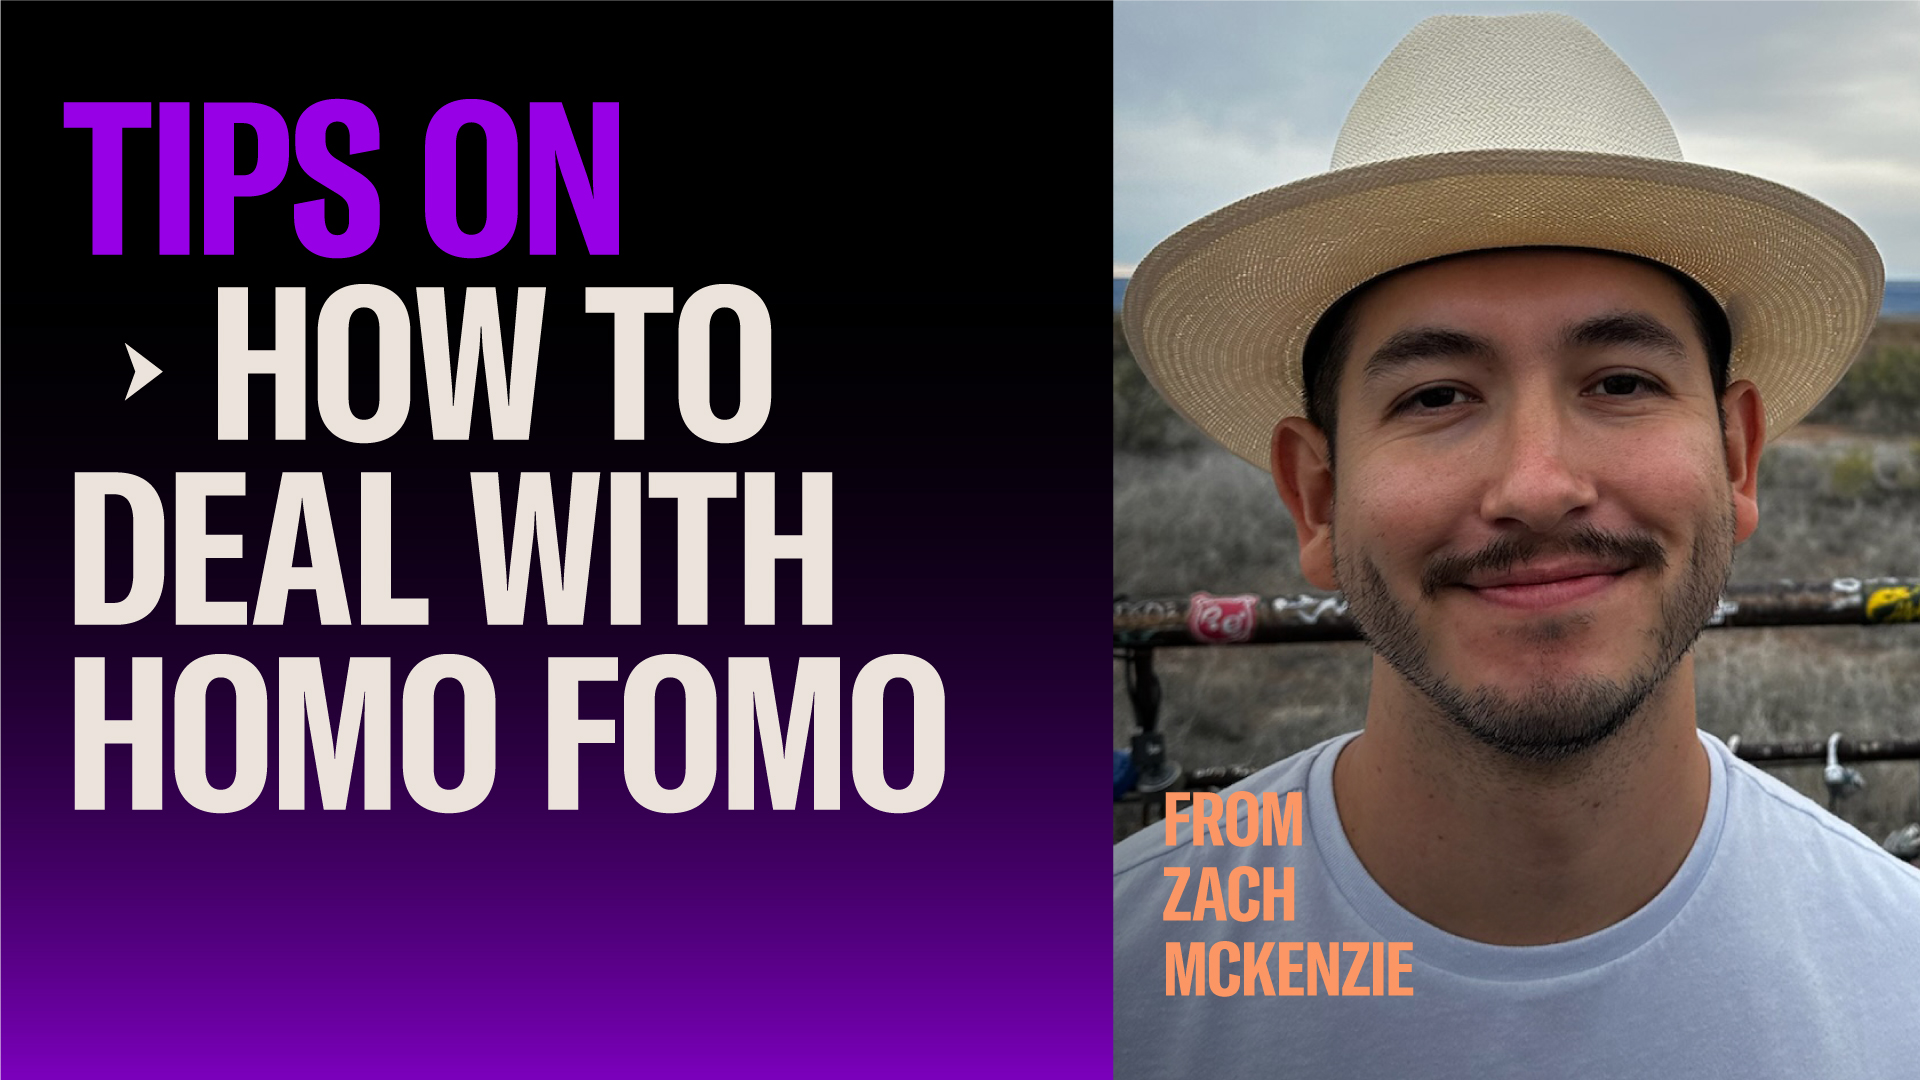 5 TIPS ON HOW TO DEAL WITH HOMO FOMO  Zach McKenzie is a publicist and writer based in Houston. He covers local and national LGBTQ+ stories for a variety of publications. 